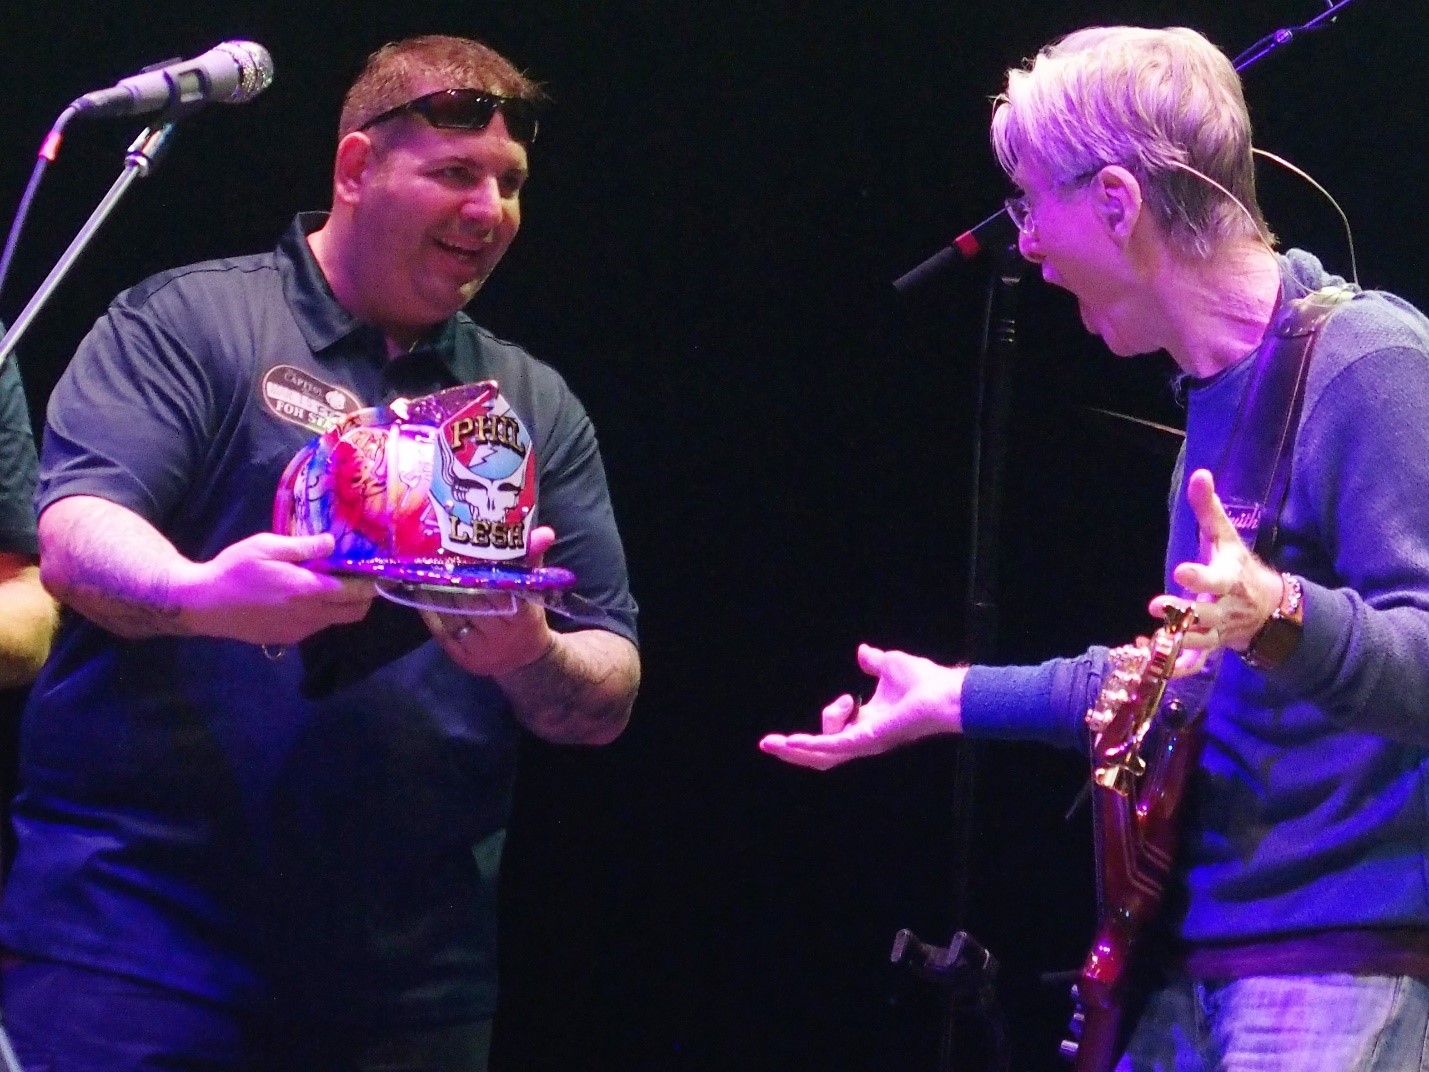 Celebrating another trip around the sun with Phil Lesh in Port Chester, NY